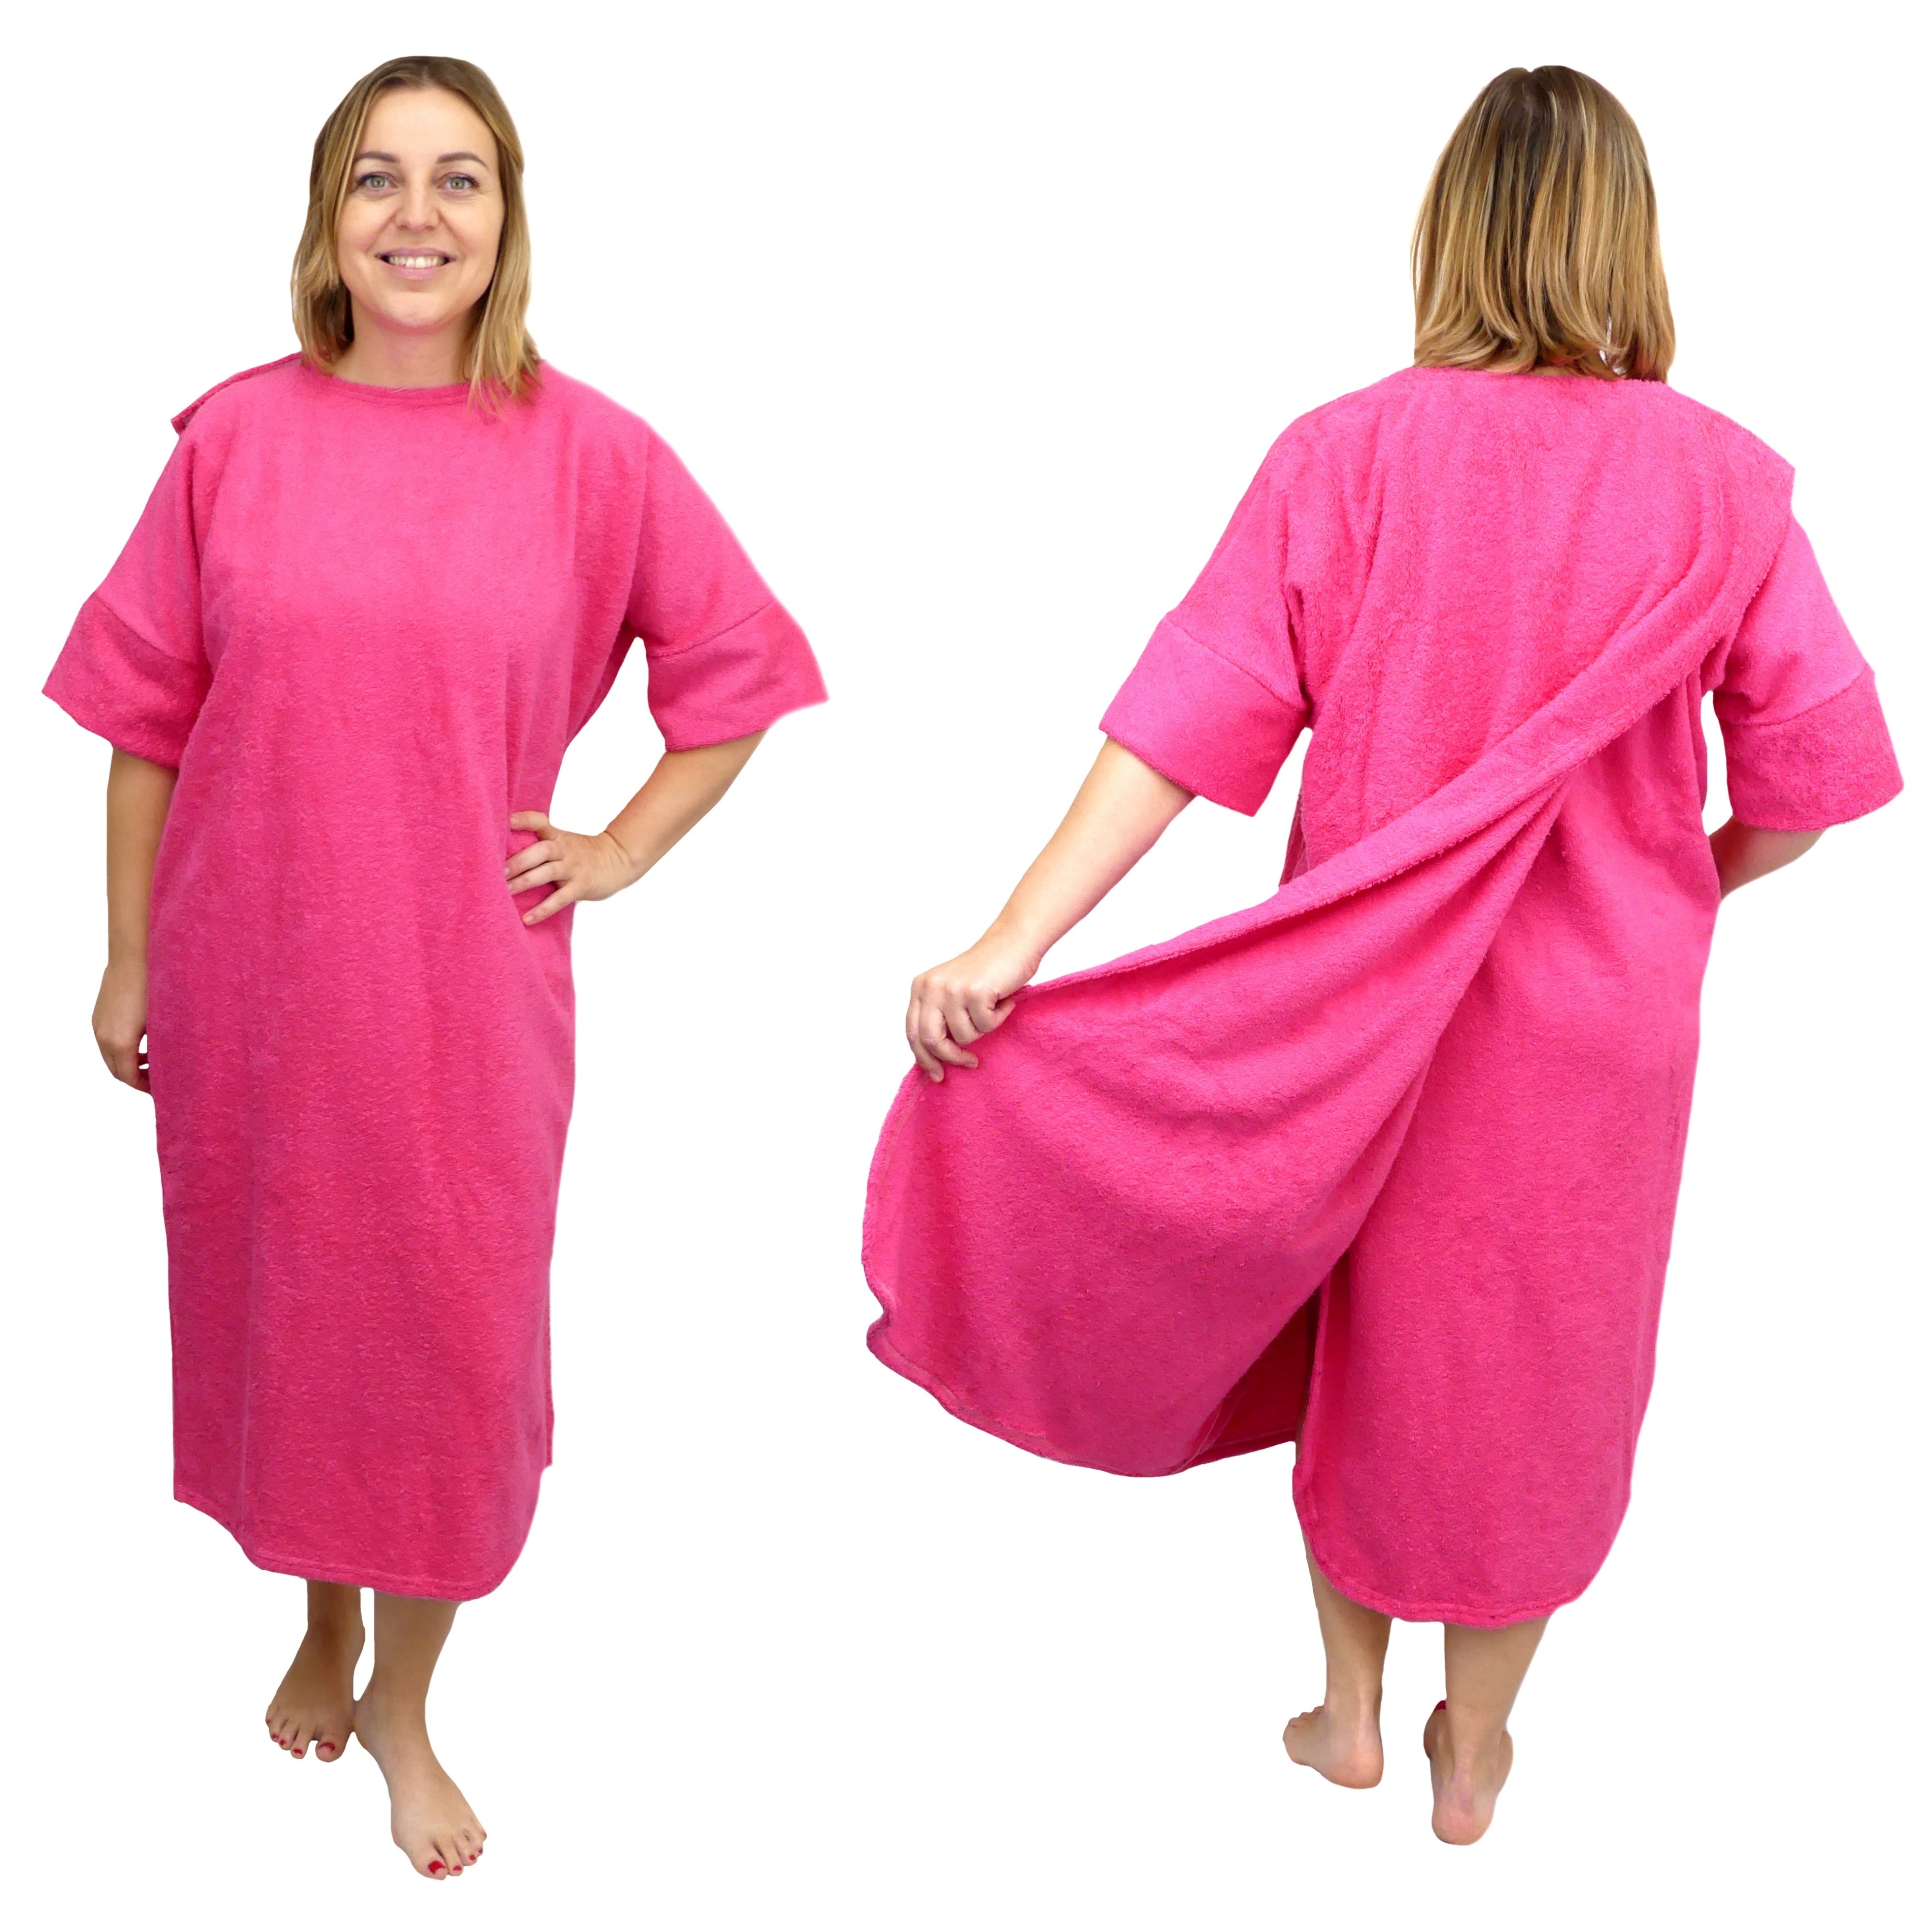 Sleepwear, Robes, Shower Robes - Women's Adaptive Adaptive Clothing for  Seniors, Disabled & Elderly Care